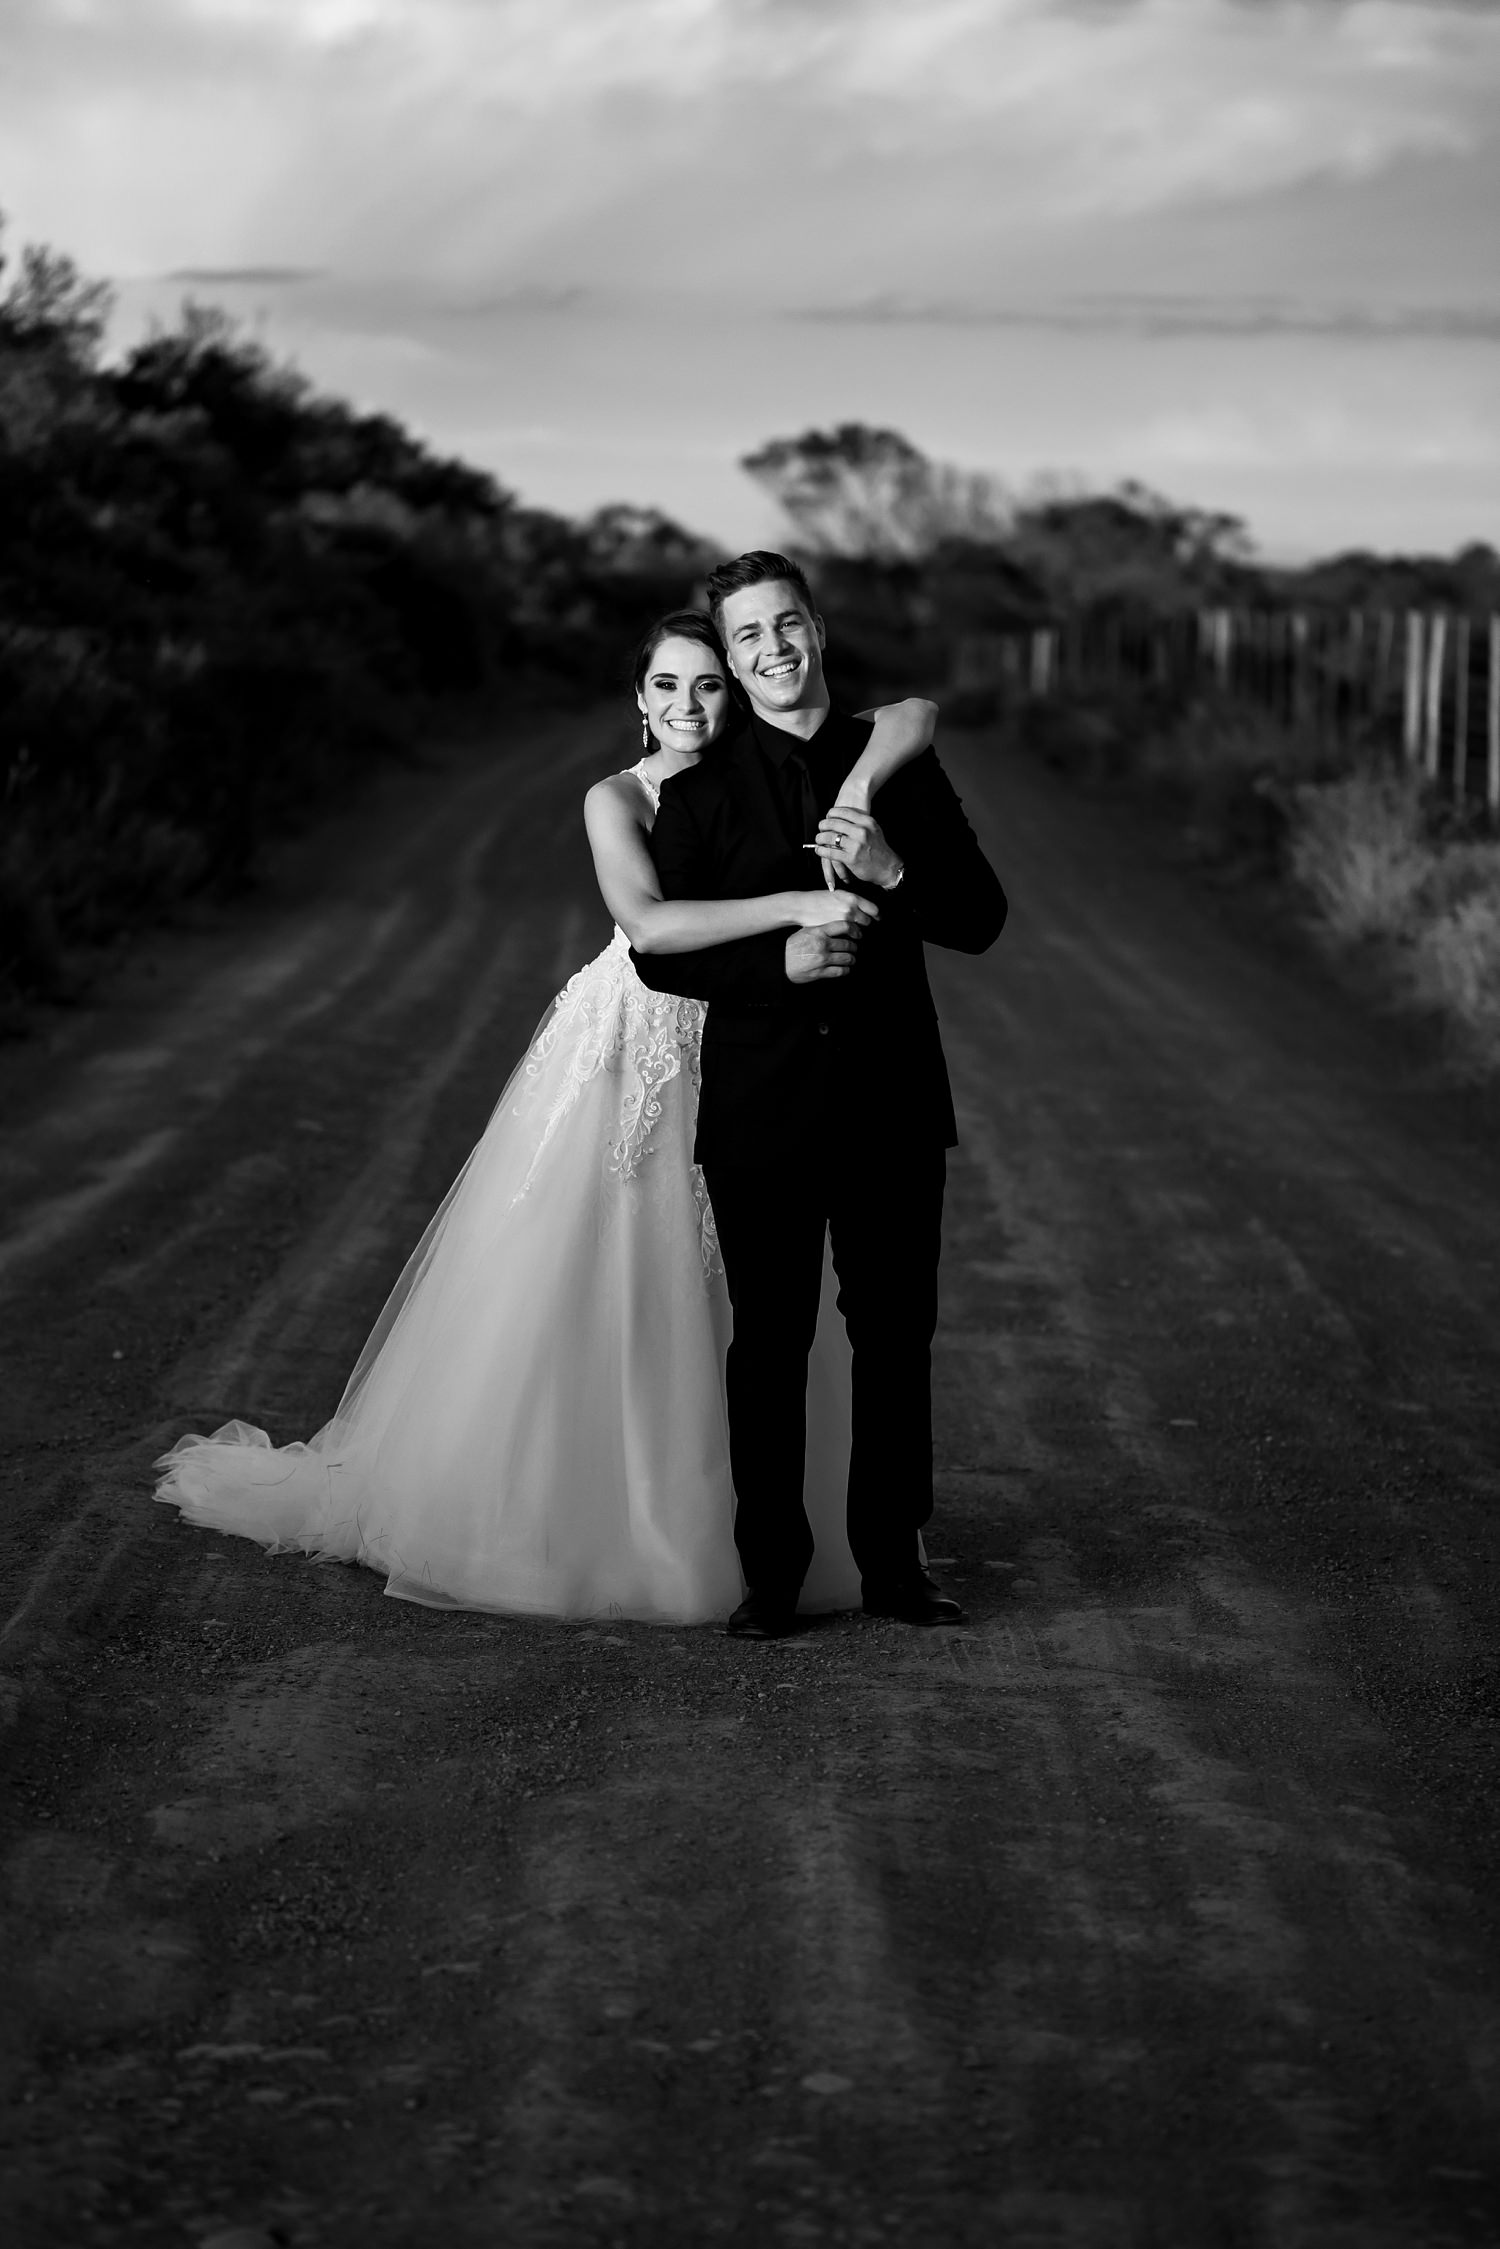 Classic black and white wedding photography by wedding photographer in South Africa, Niki M Photography